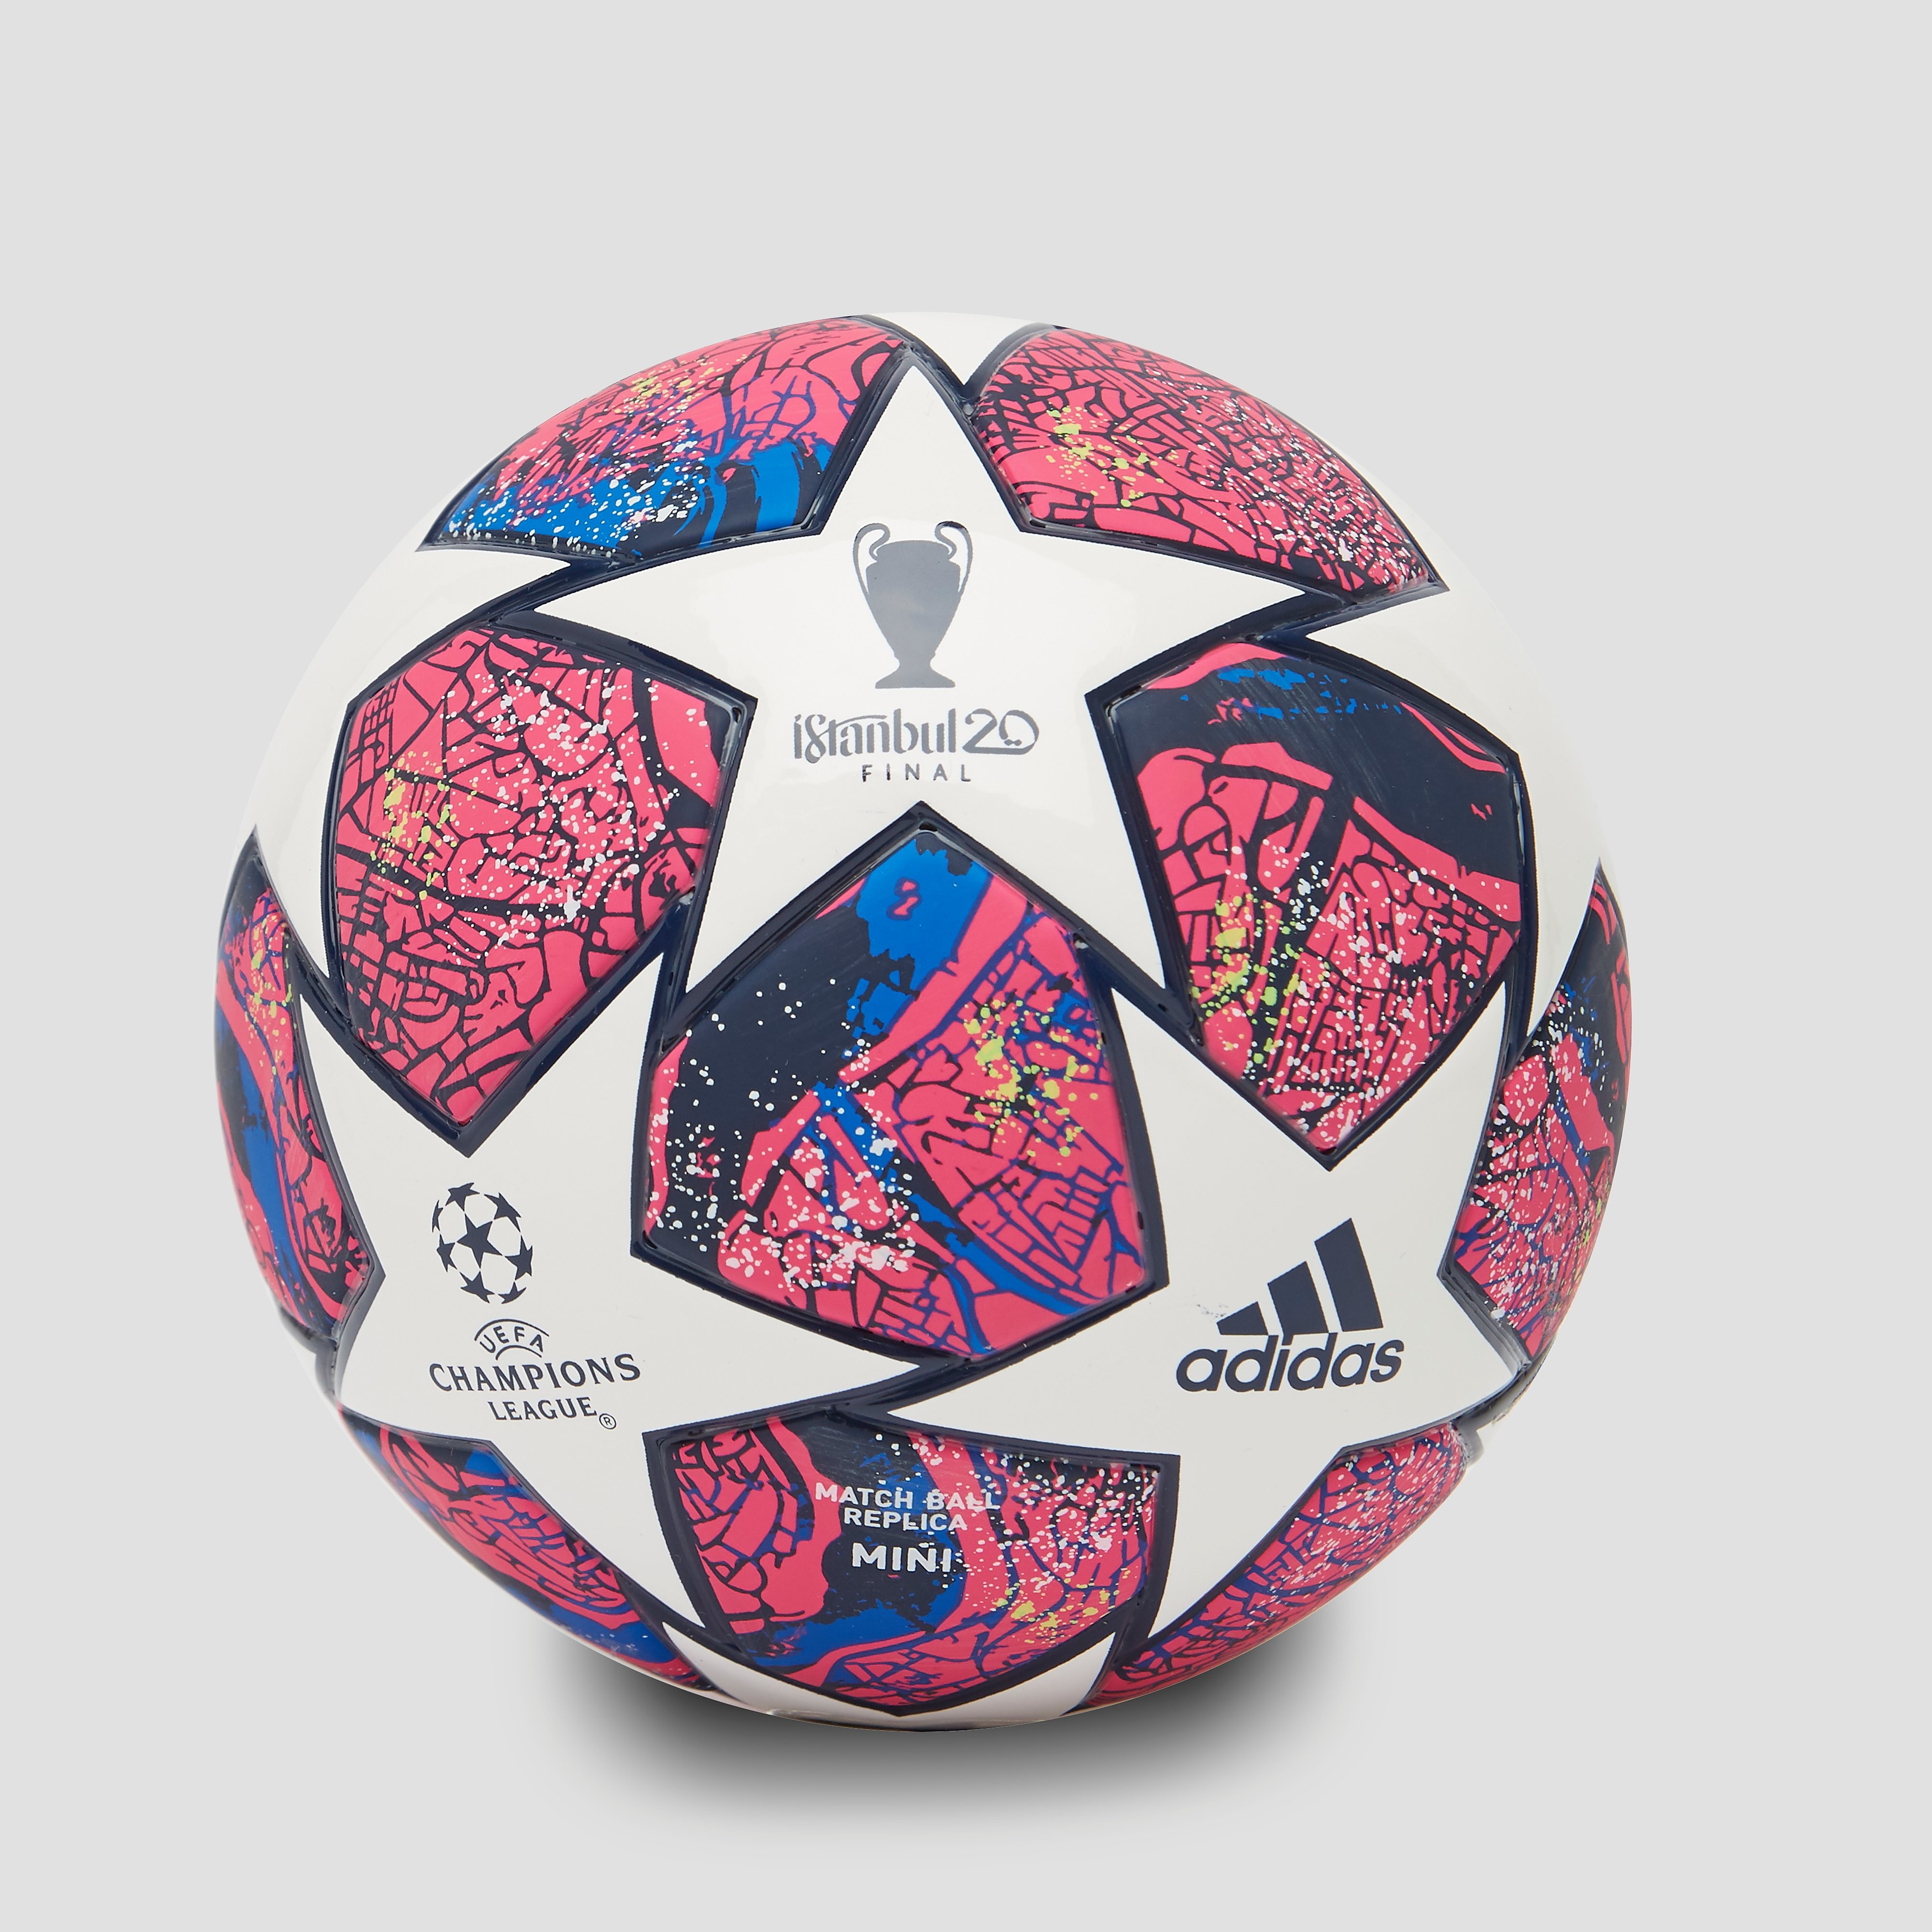 adidas Uefa champions league finale 2020 istanbul mini voetbal wit/blauw/paars Dames